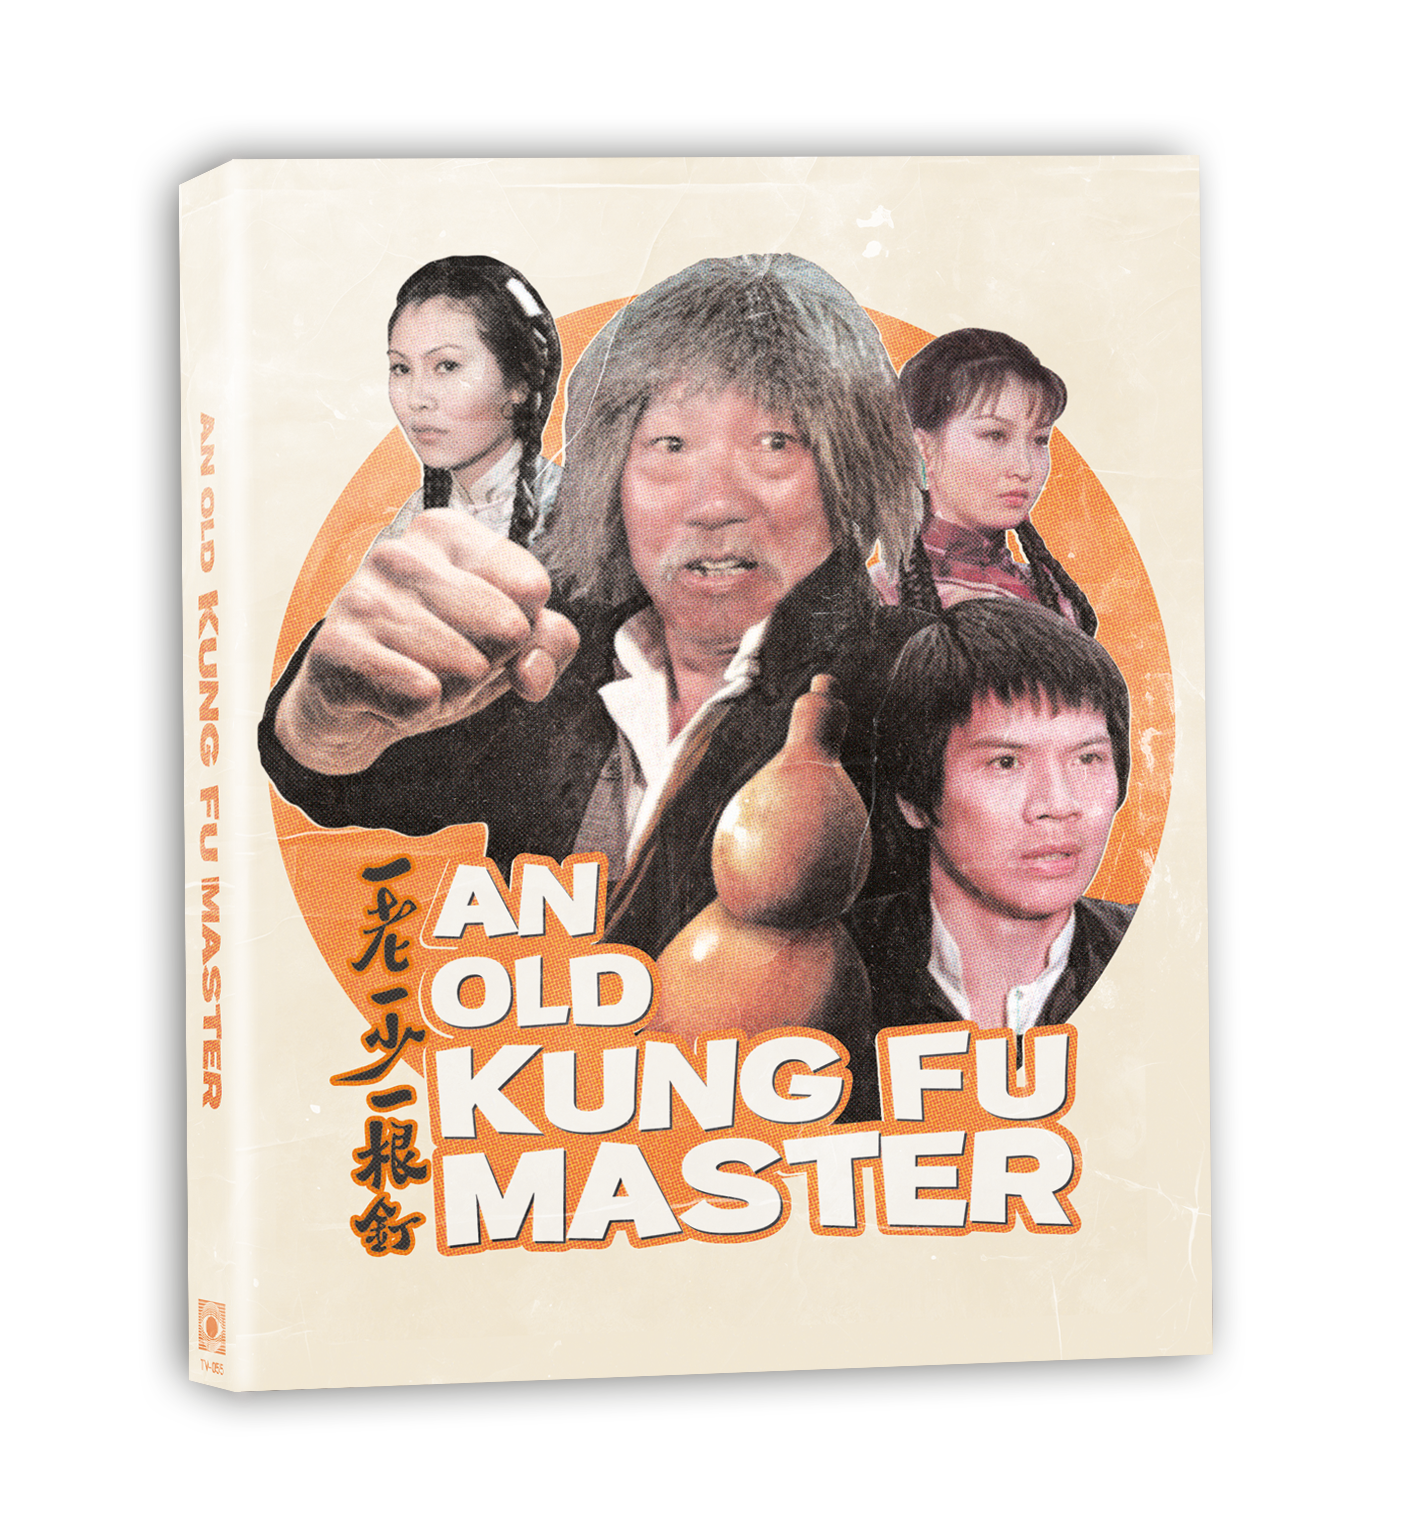 An Old Kung Fu Master (1981) blu-ray with slipcover